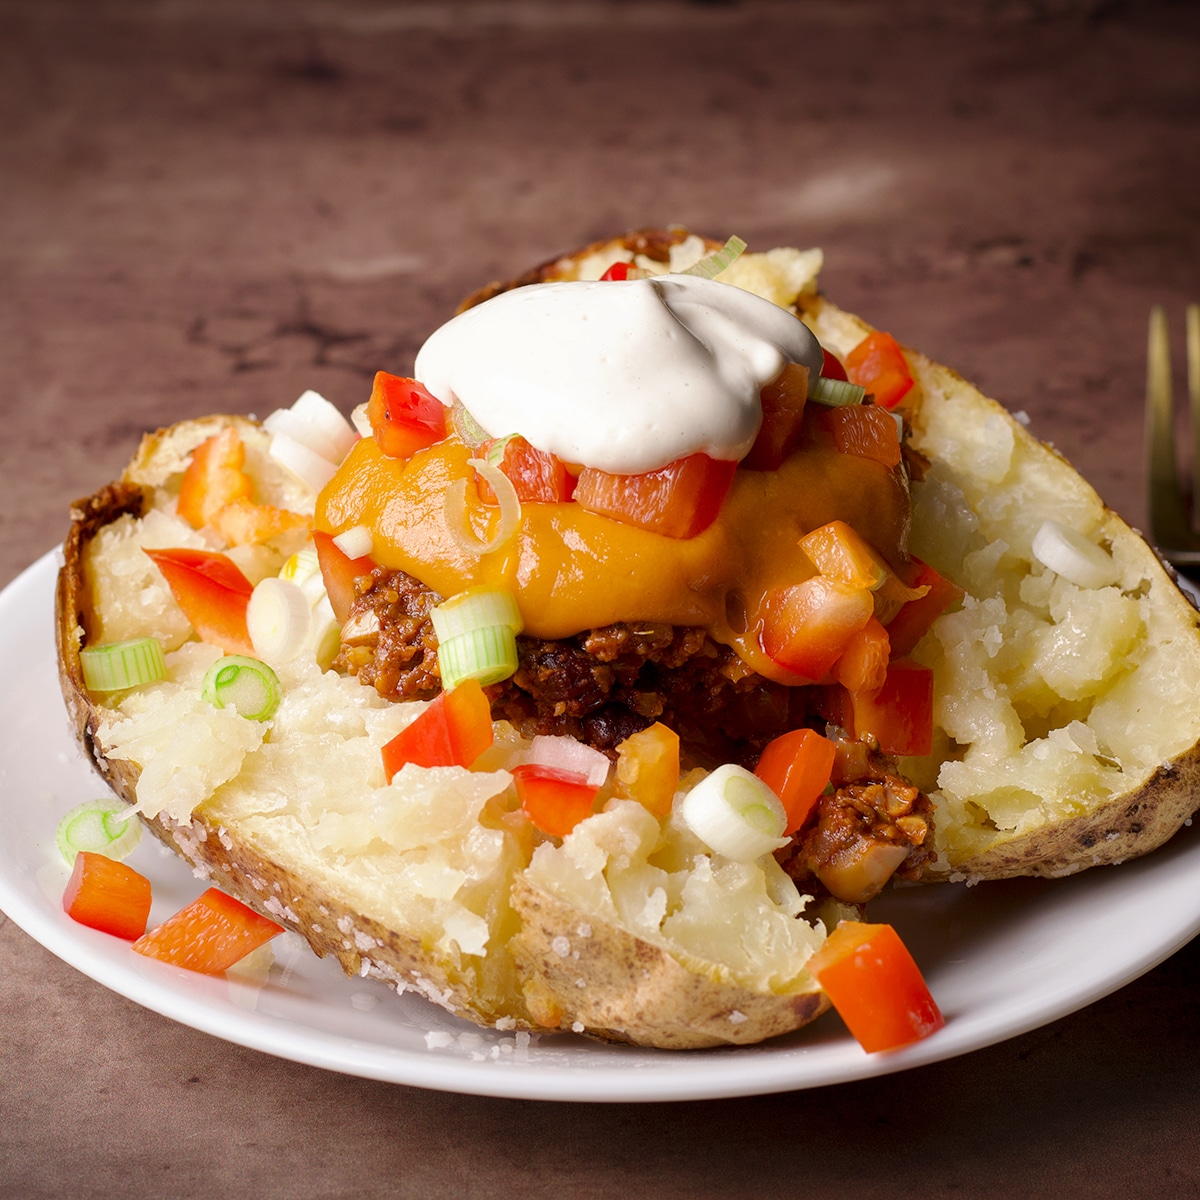 A baked potato split in half and topped with vegan taco meat, vegan nacho cheese, vegan sour cream, and chopped veggies.